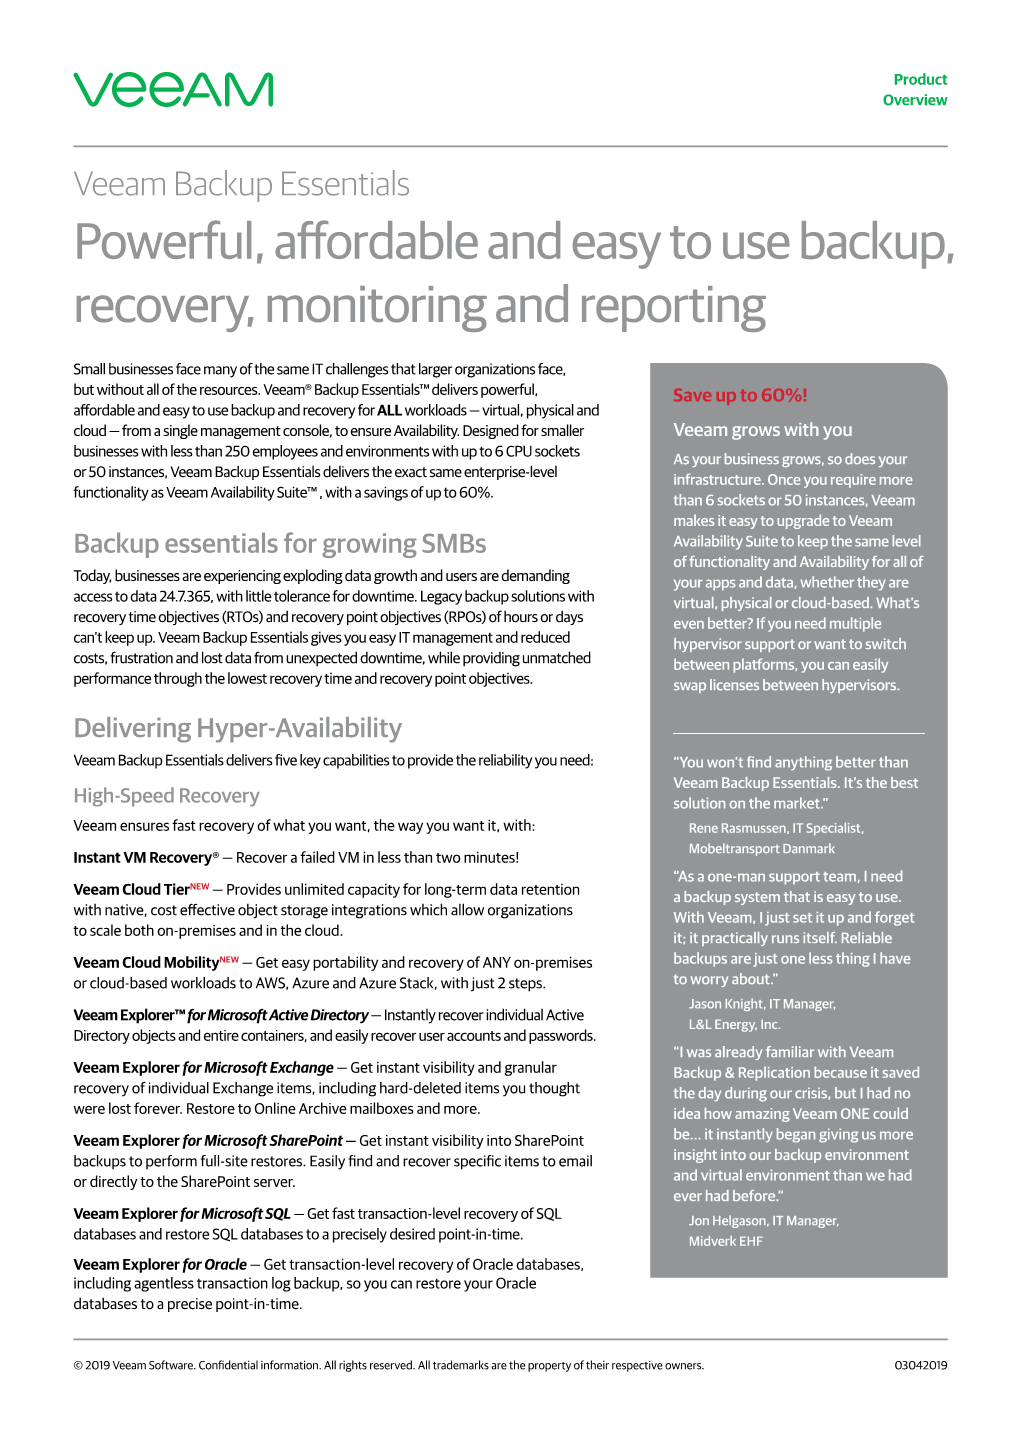 Powerful, Affordable and Easy to Use Backup, Recovery, Monitoring and Reporting